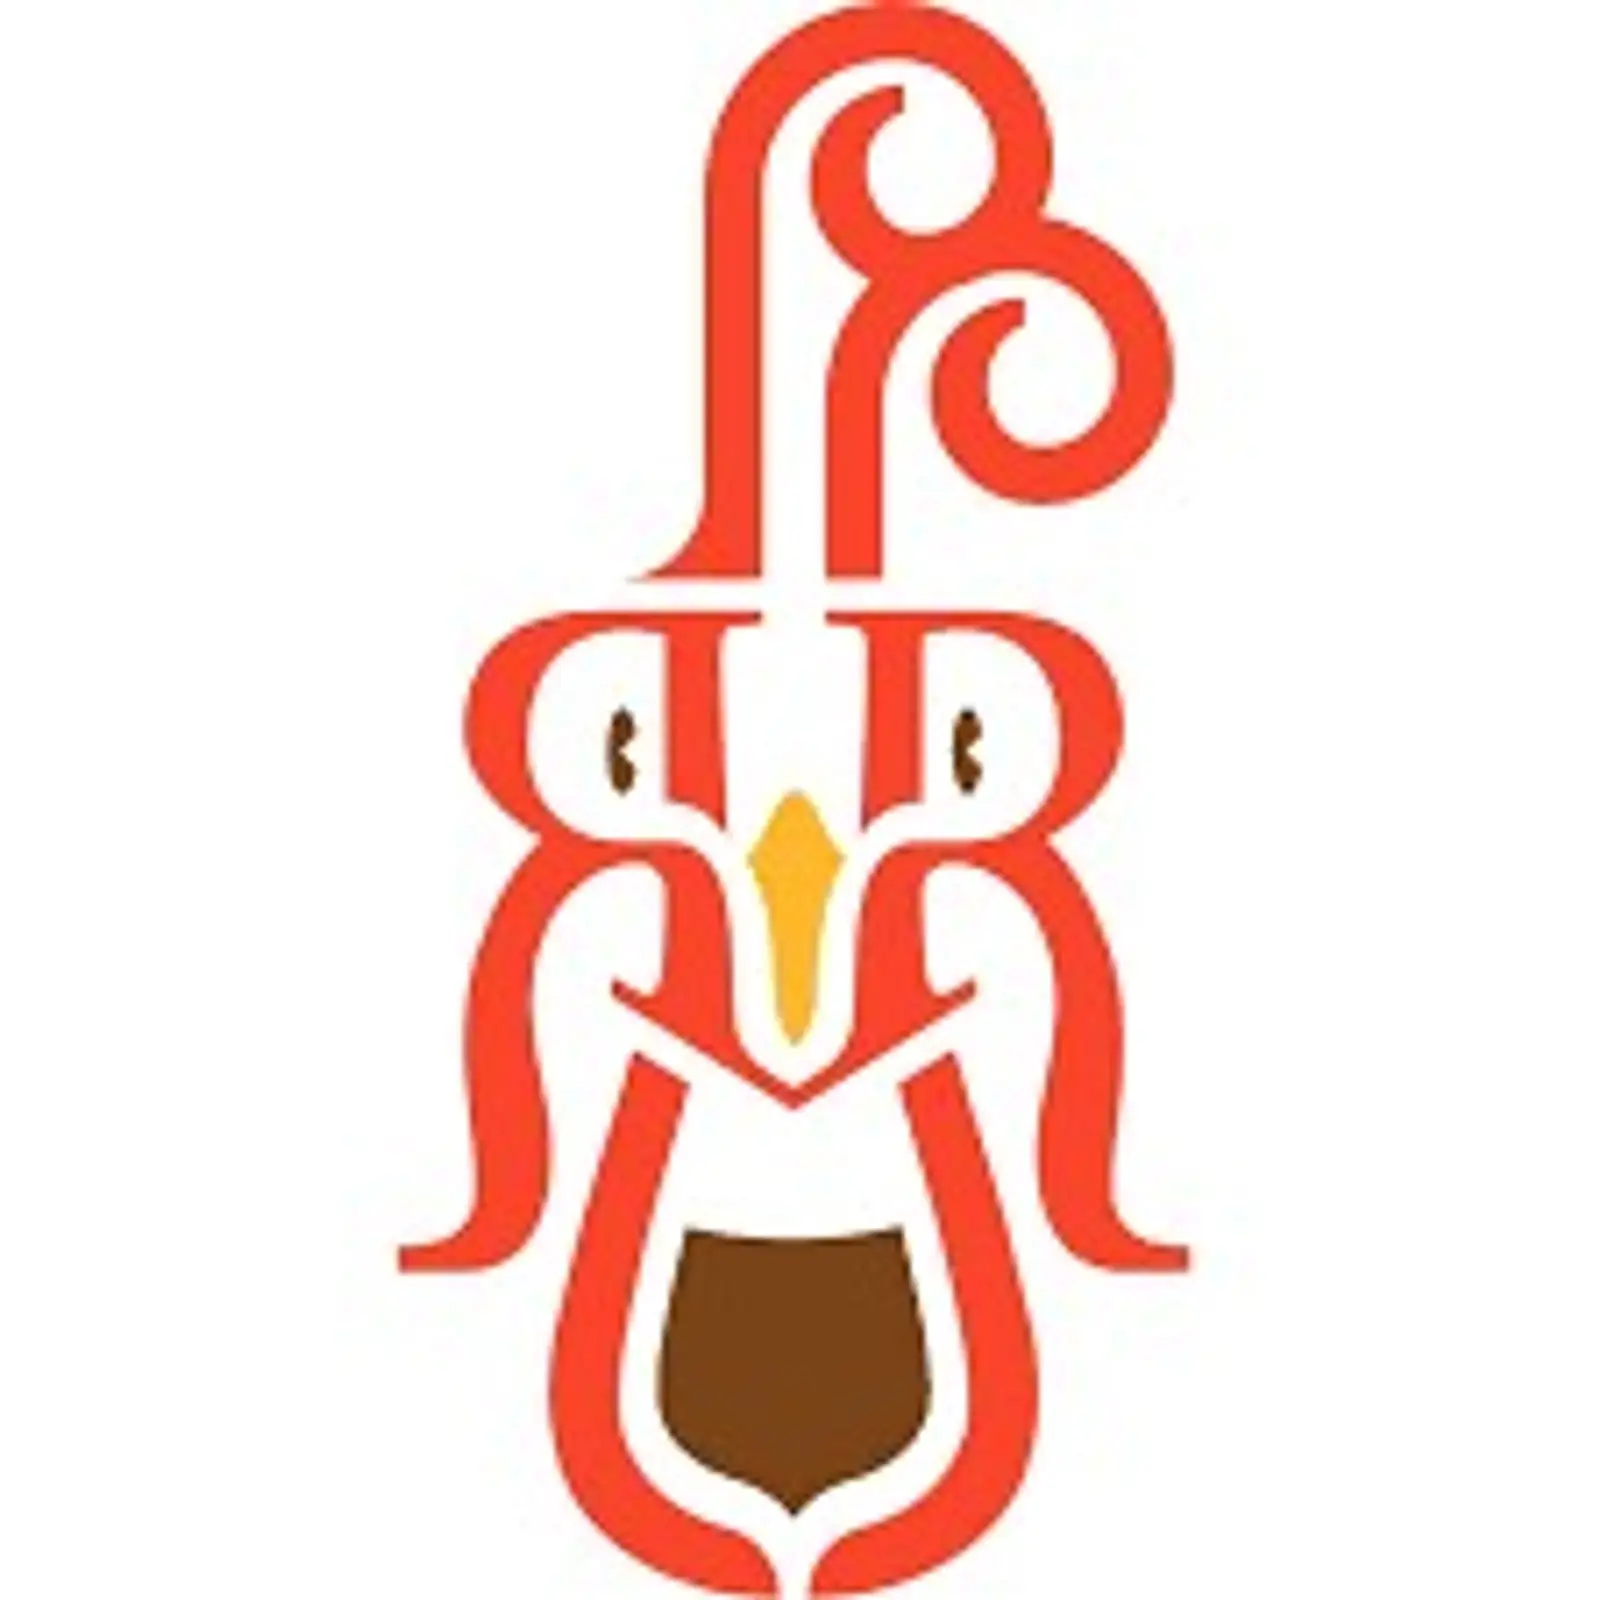 Red Rooster Coffee logo